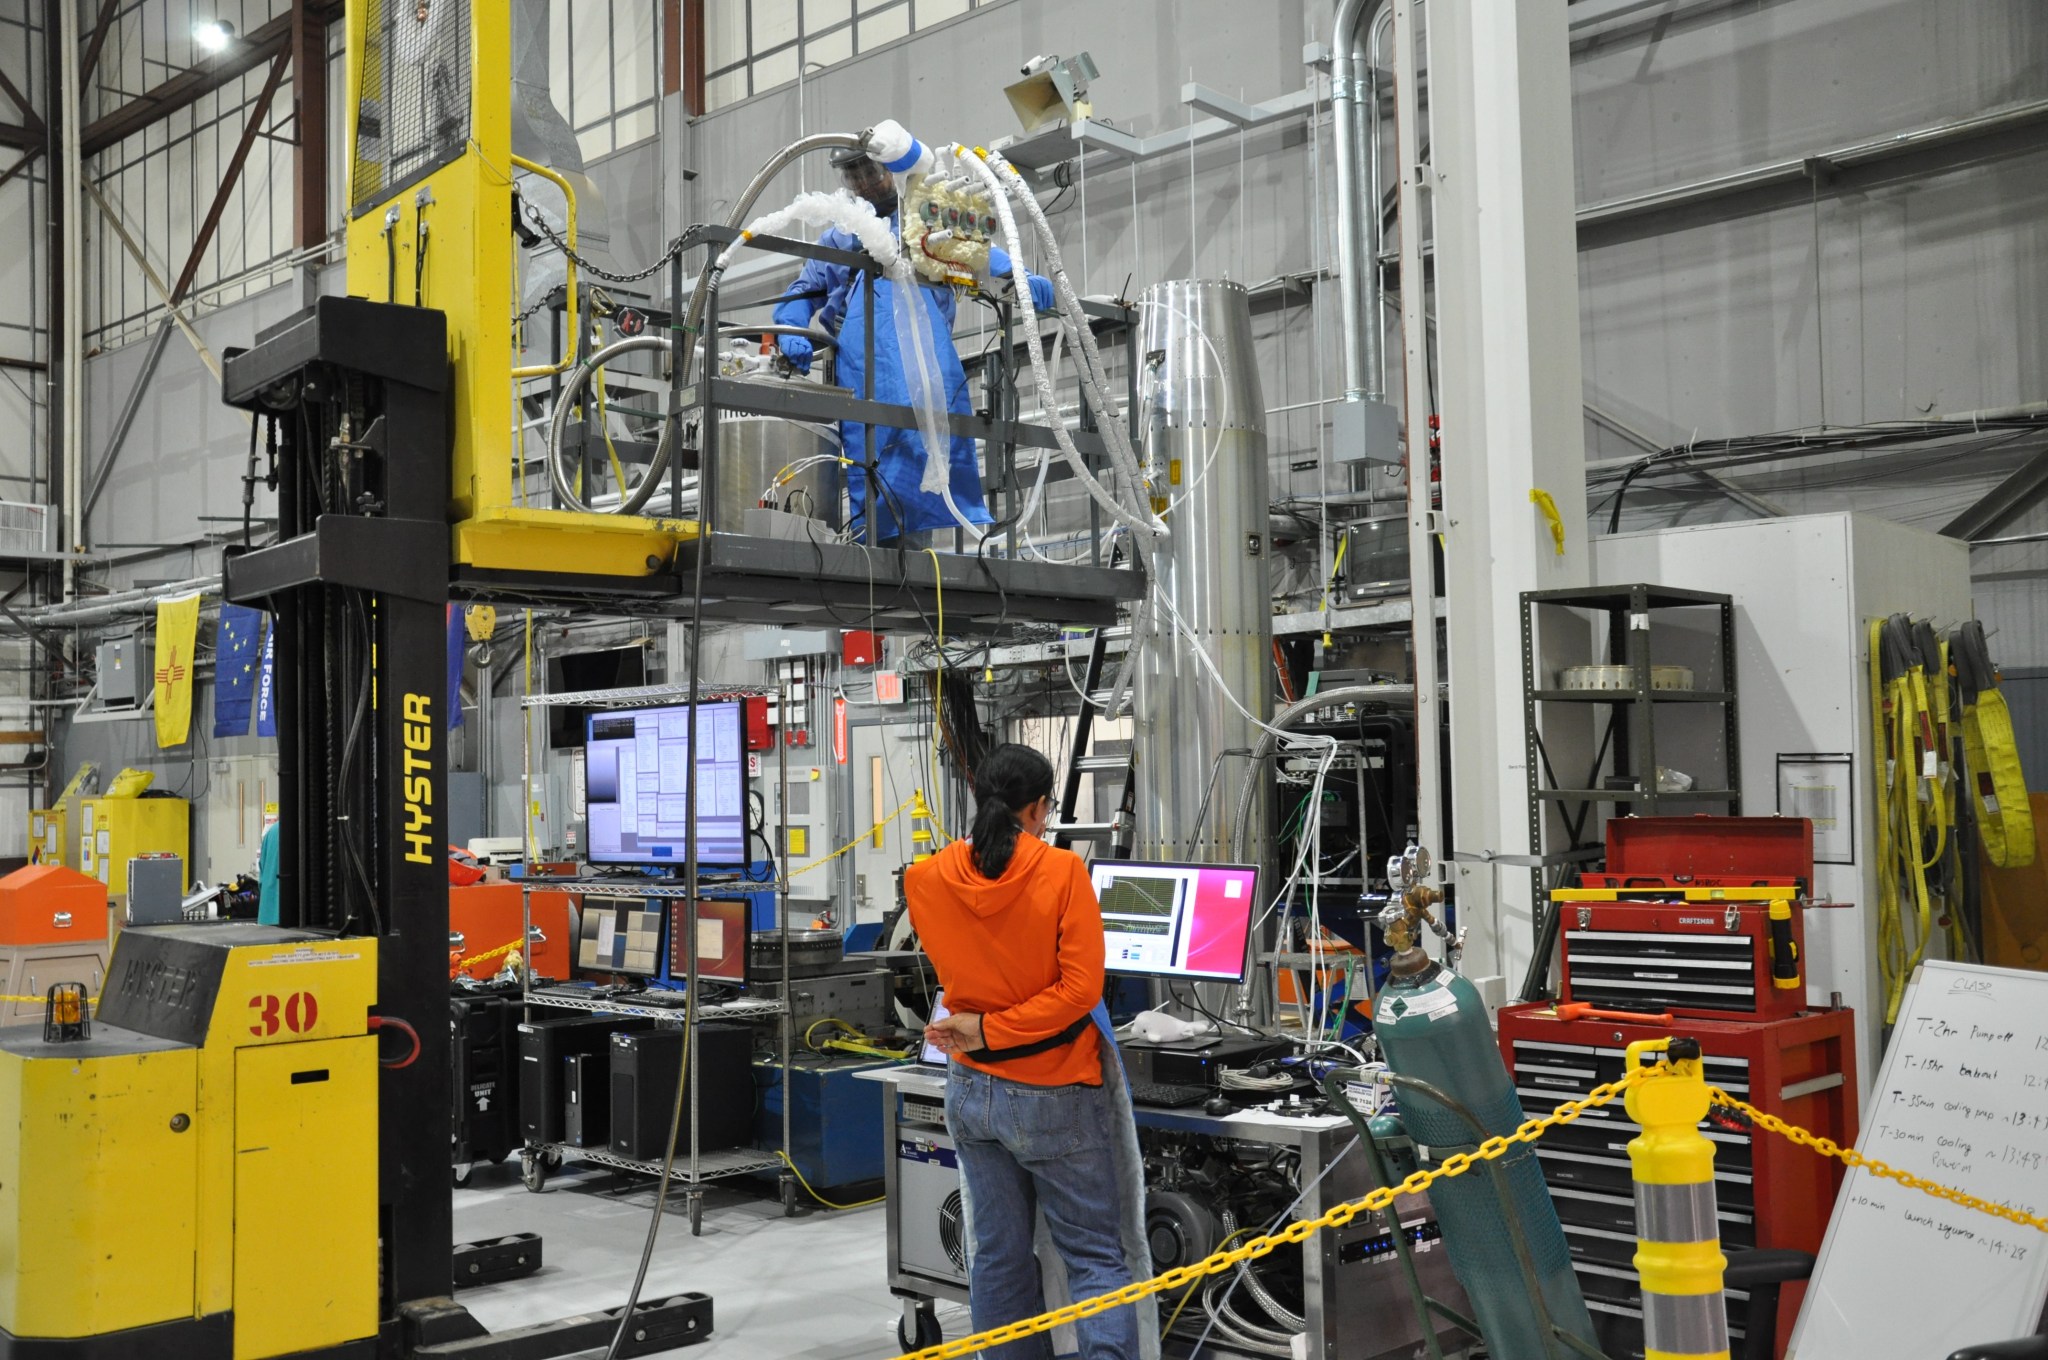 Workers at Marshall conduct vertical cooling testing on the CLASP instrument during integration of the instrument hardware.